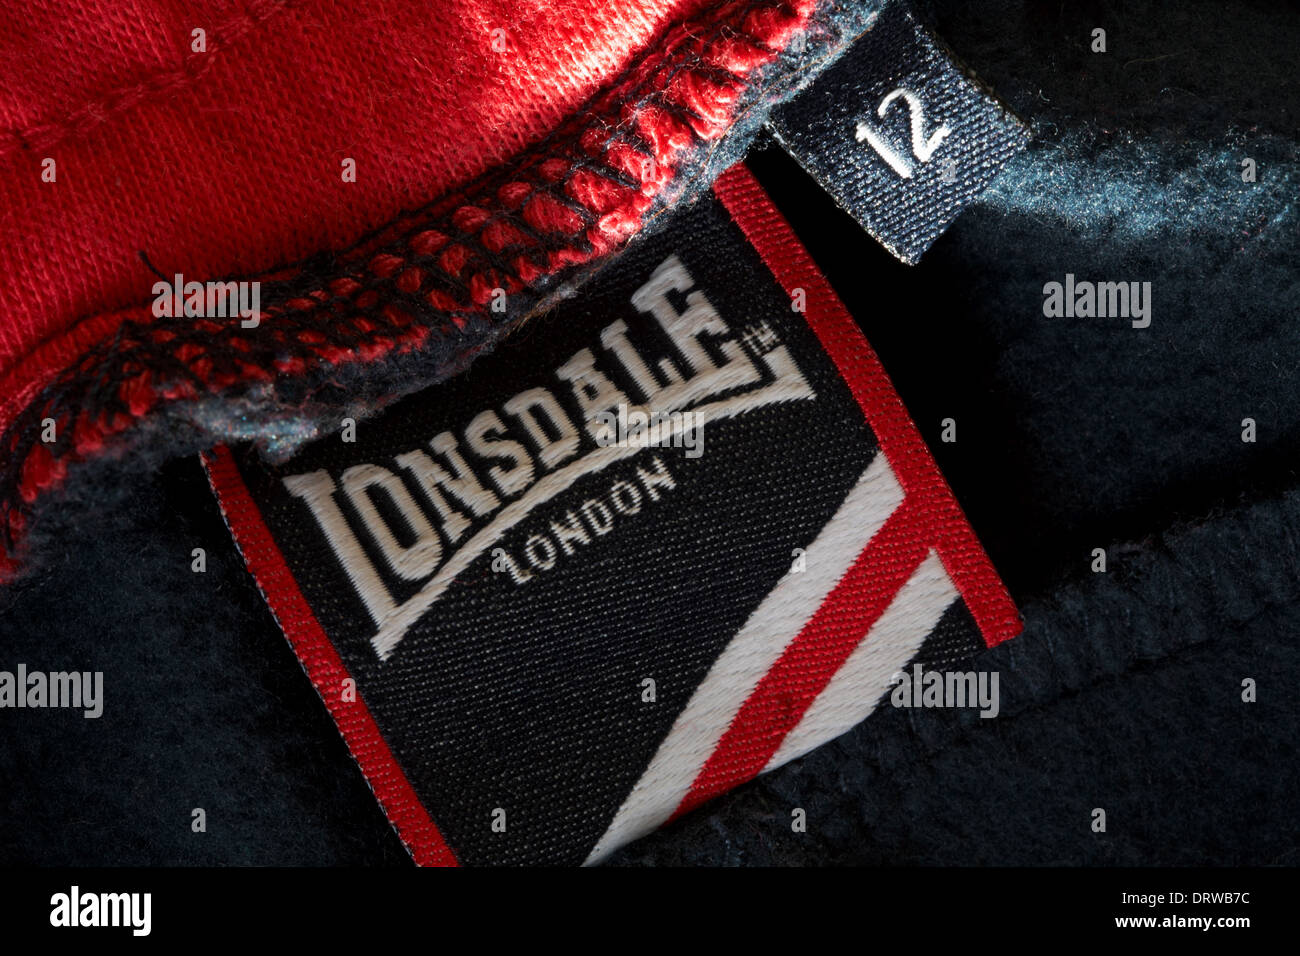 Lonsdale logo hi-res stock photography and images - Alamy